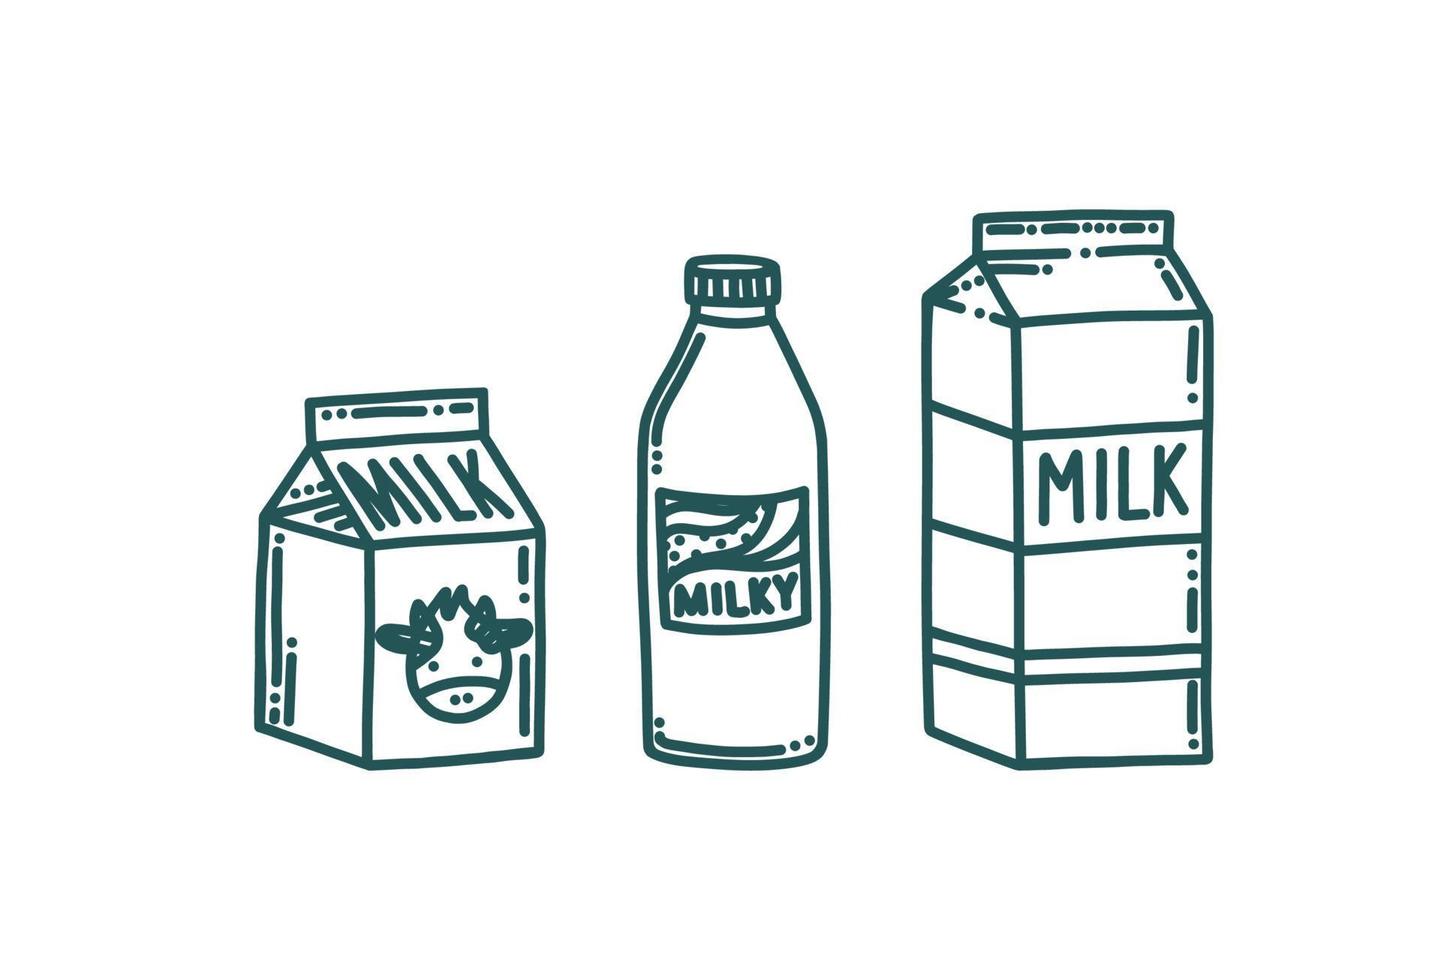 Milk packages in doodle style. Milk bottle and boxes isolated in white background. Vector illustration